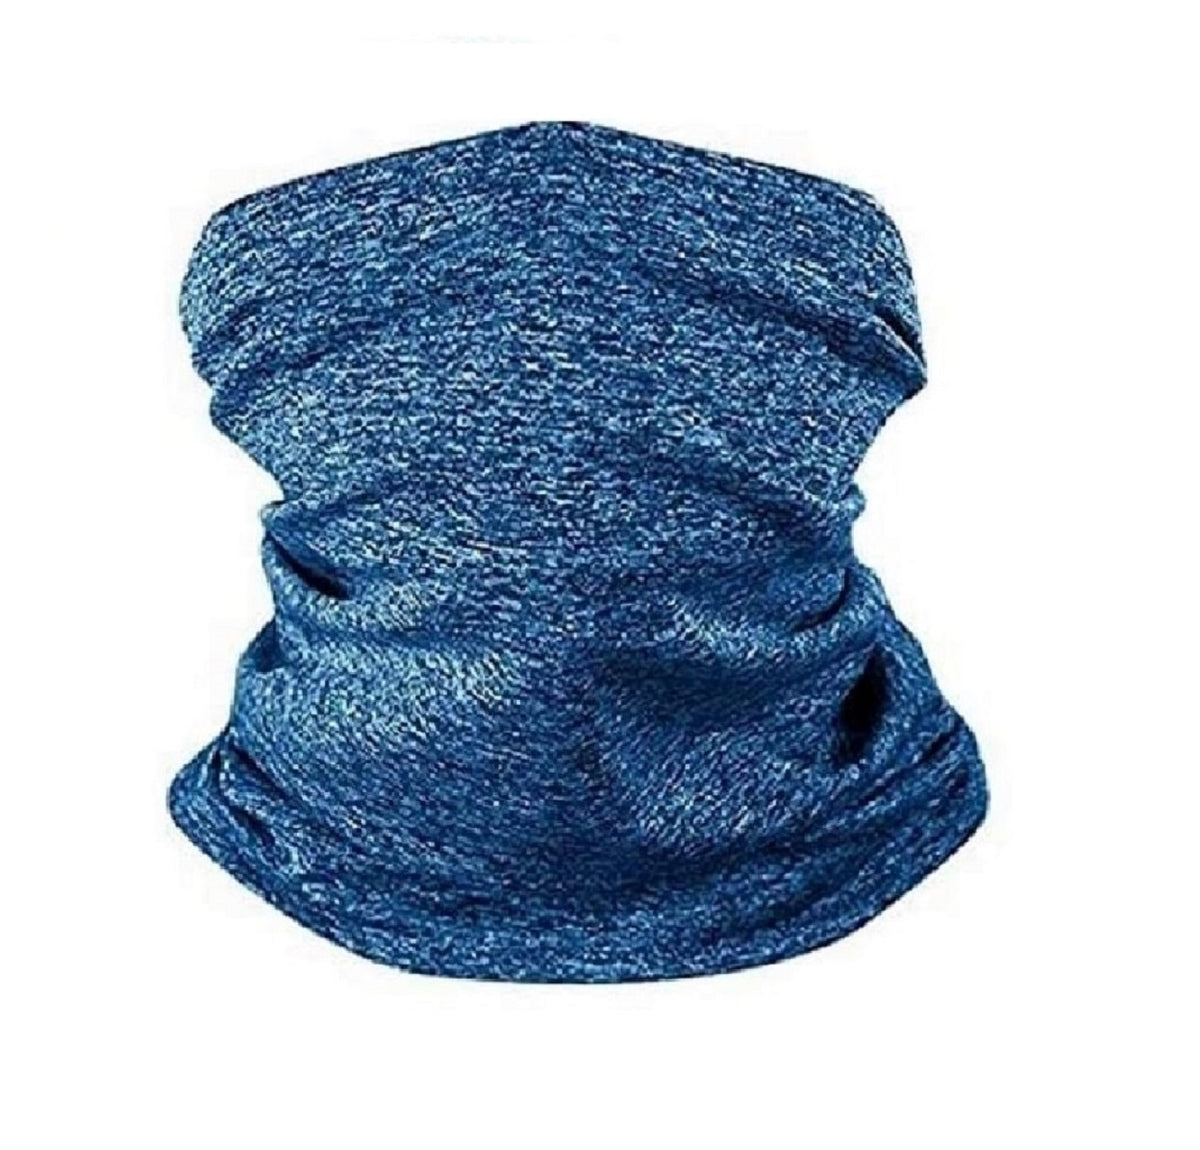 Details about   Multi-use Bandana Head Face Neck Gaiter Snood Headwear Beanie Colors Tube Scarf